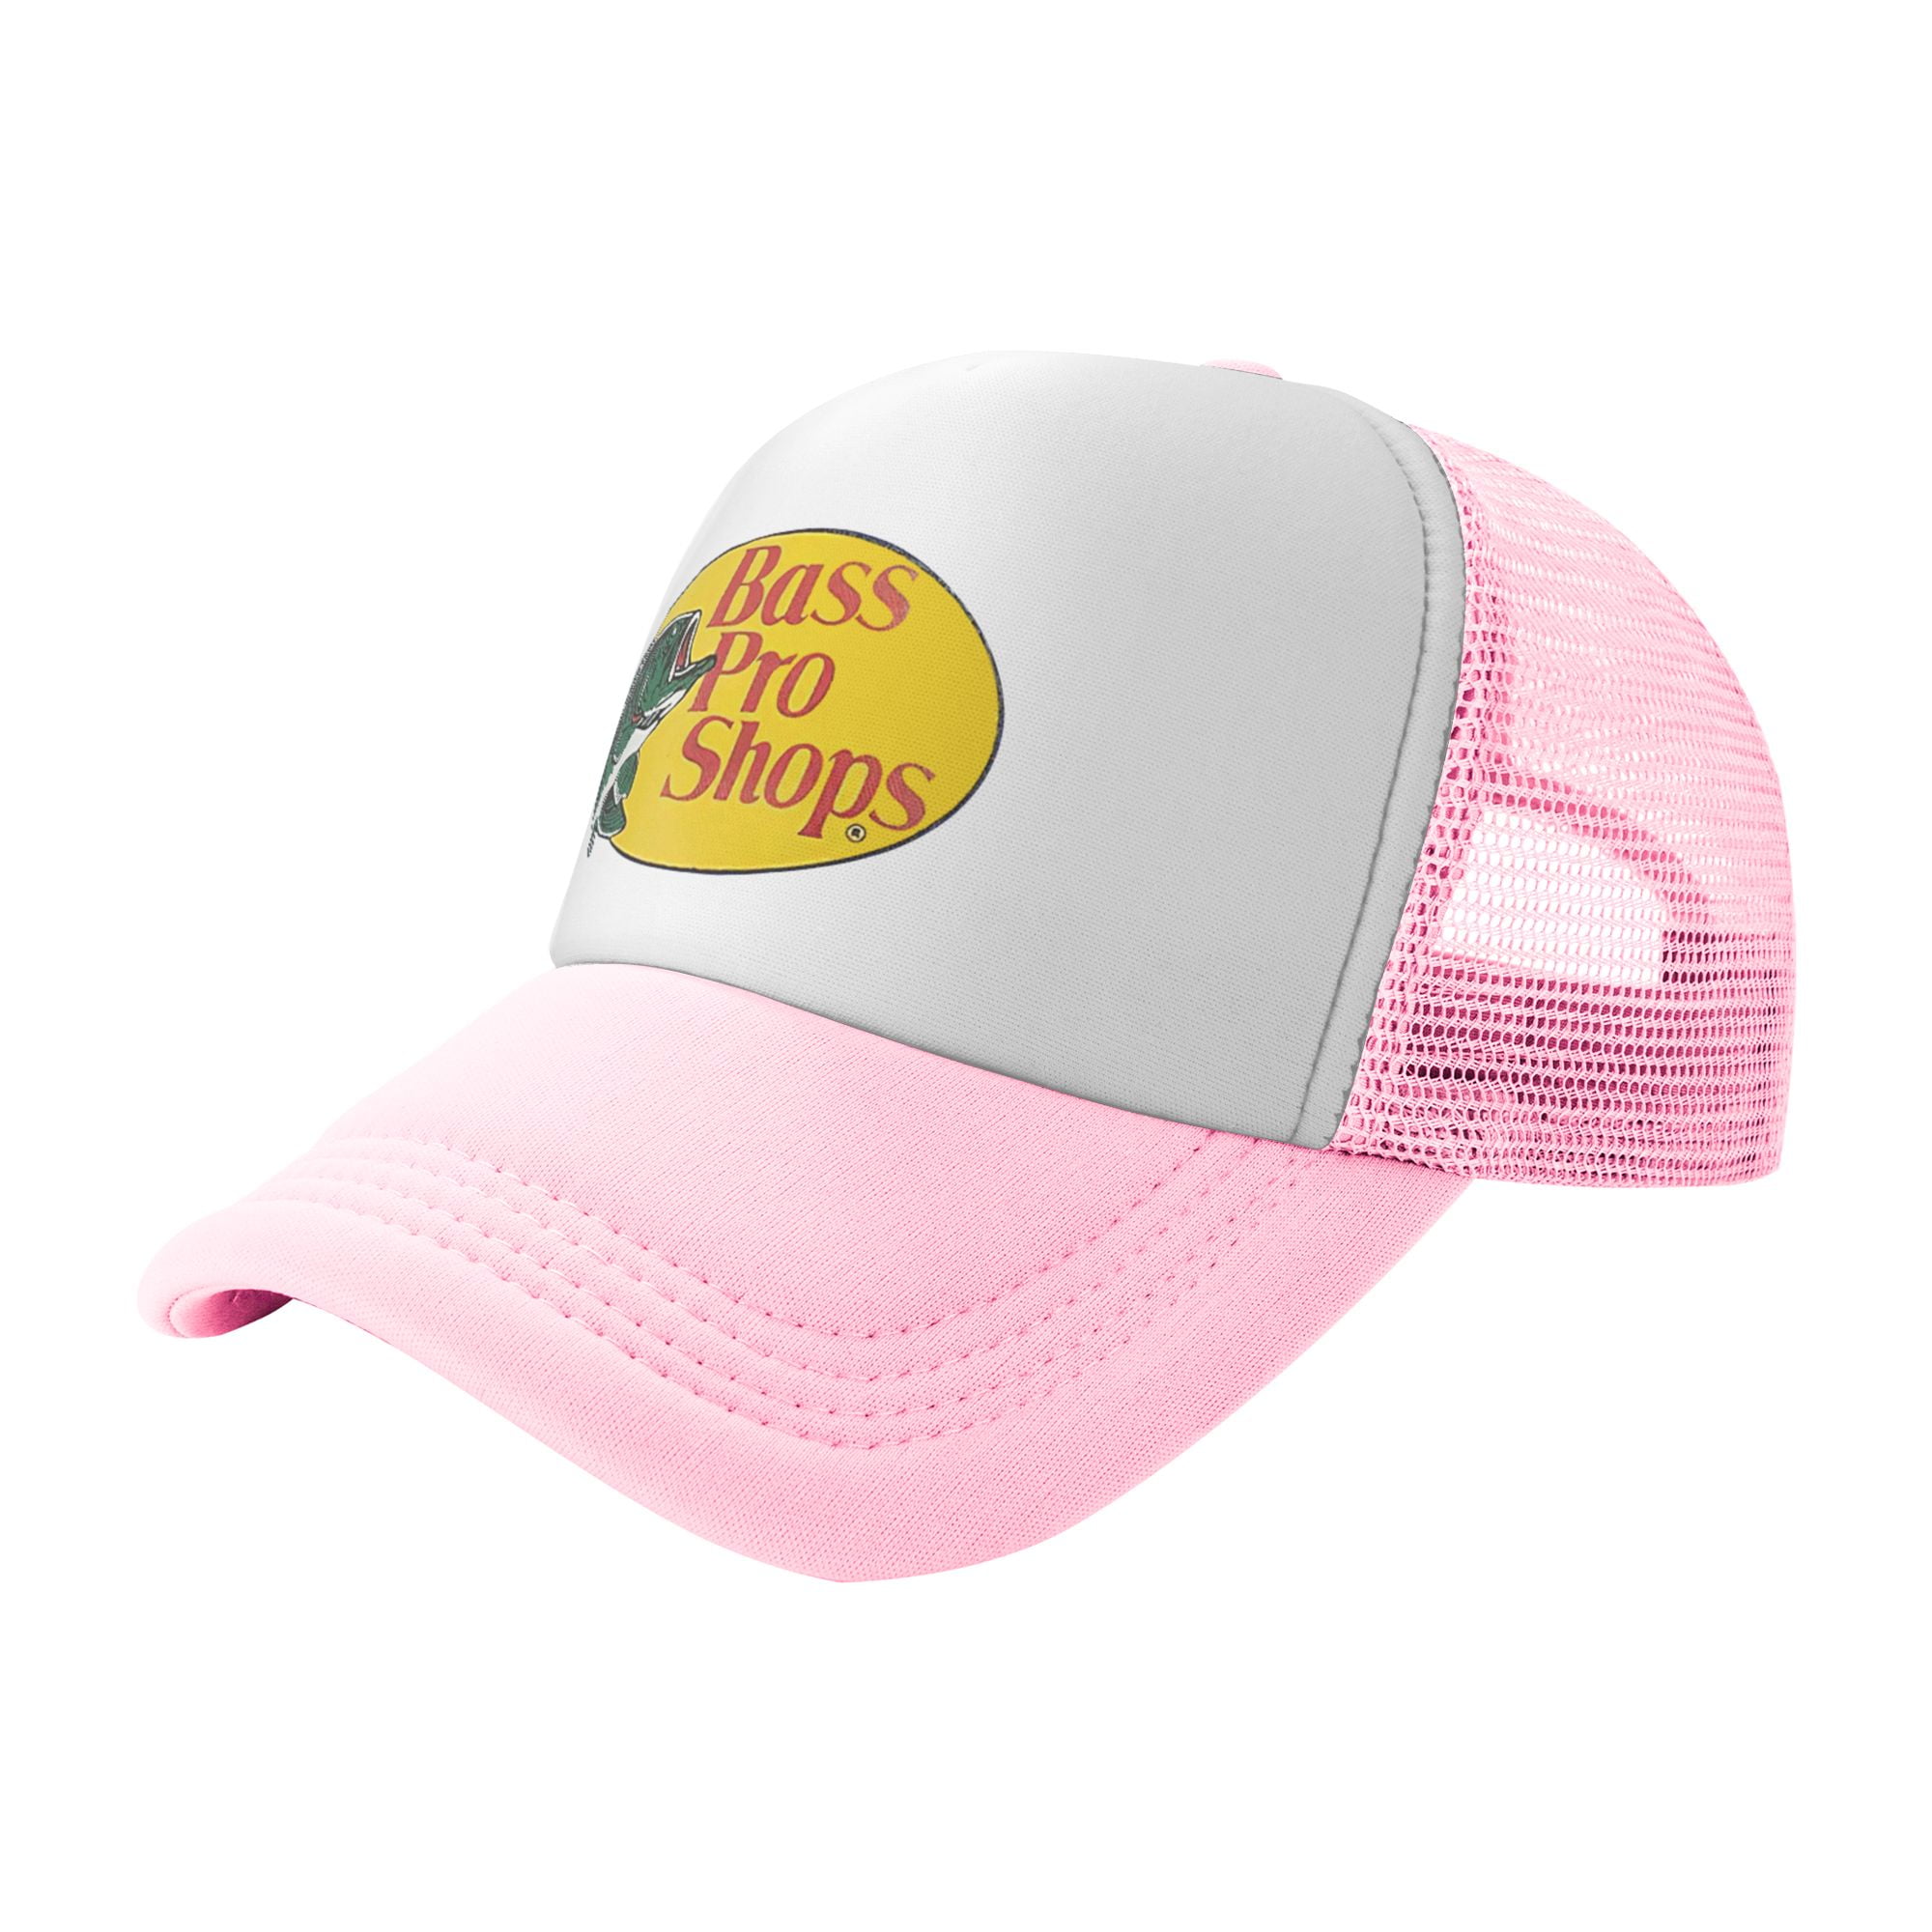 Bass Pro Shop Outdoor Trucker Hats Pink - Size Fits All Snapback Closure - Great for Hunting & Fishing - Walmart.com